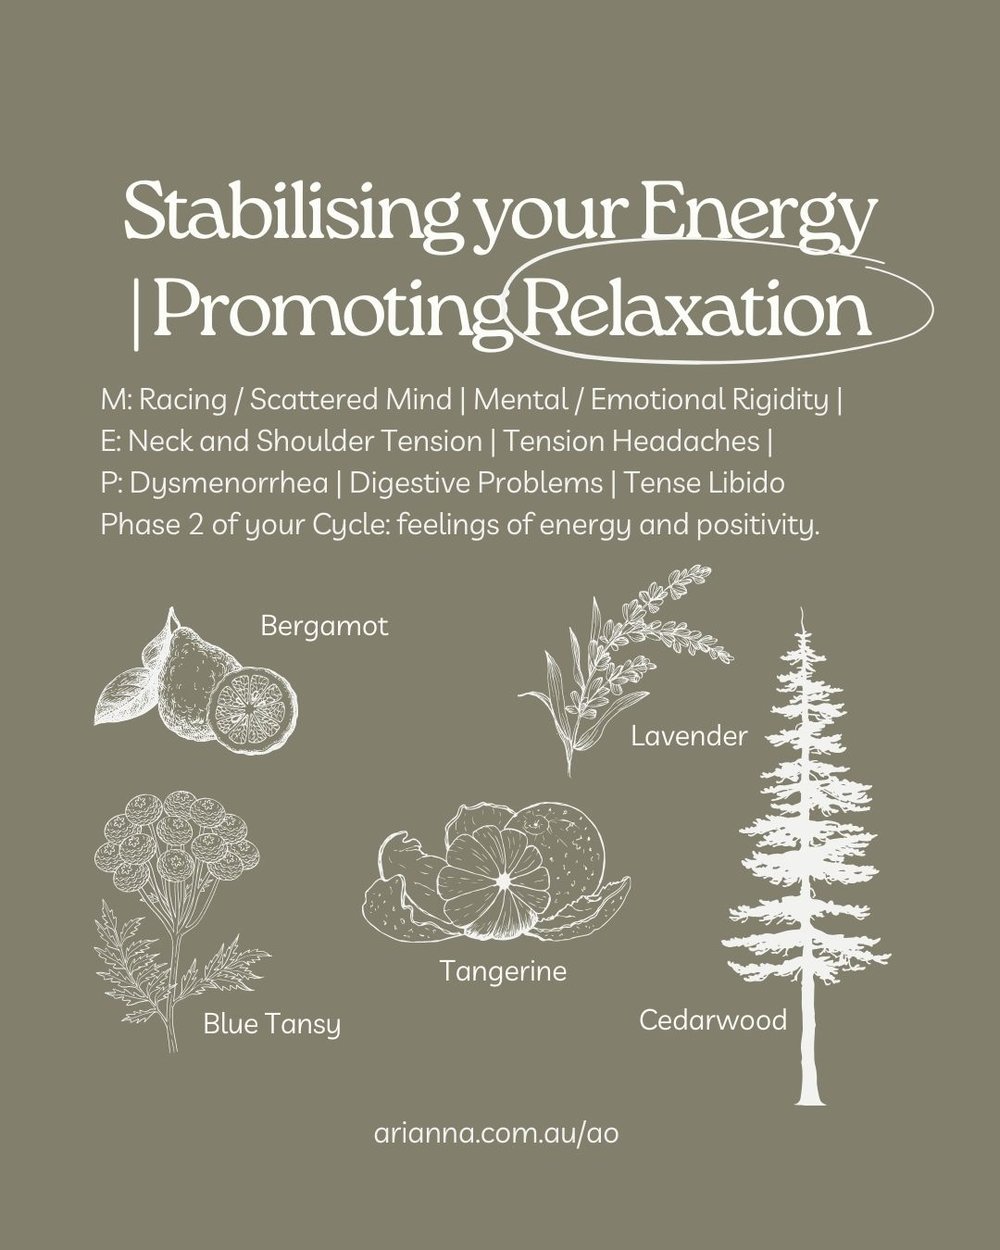 Stabilising your Energy Promoting Relaxationjpg